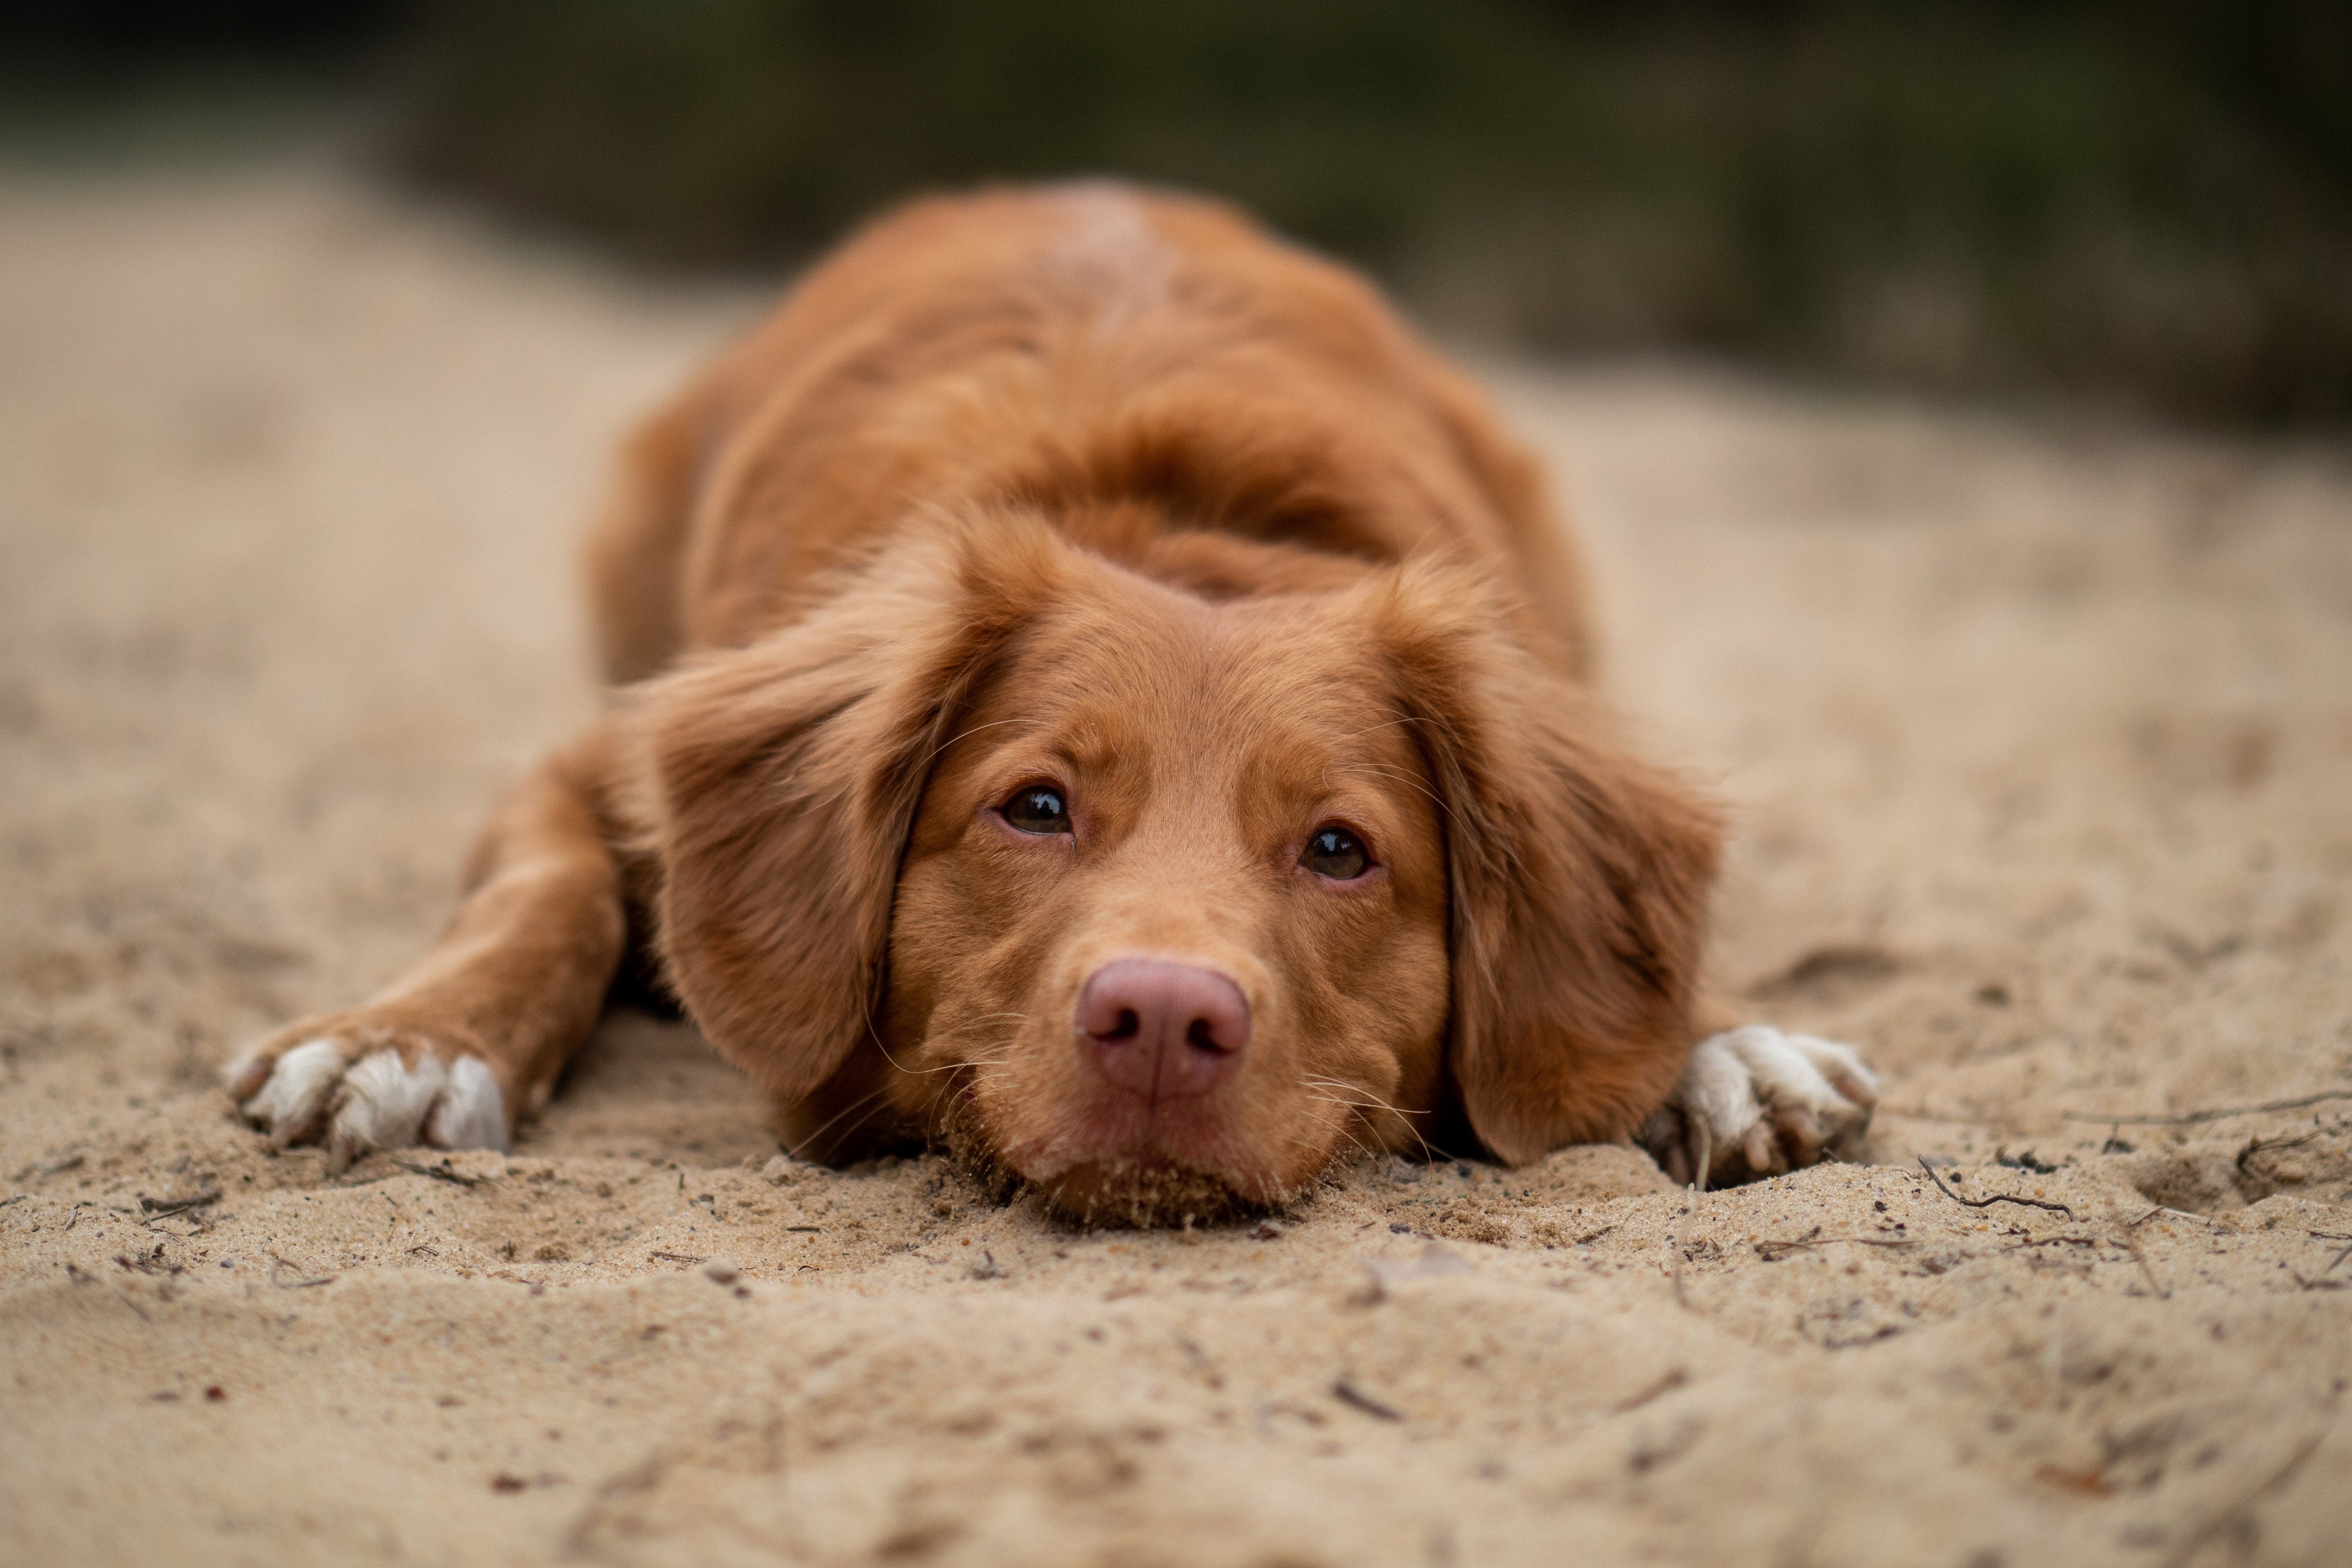 A dog in the sand.